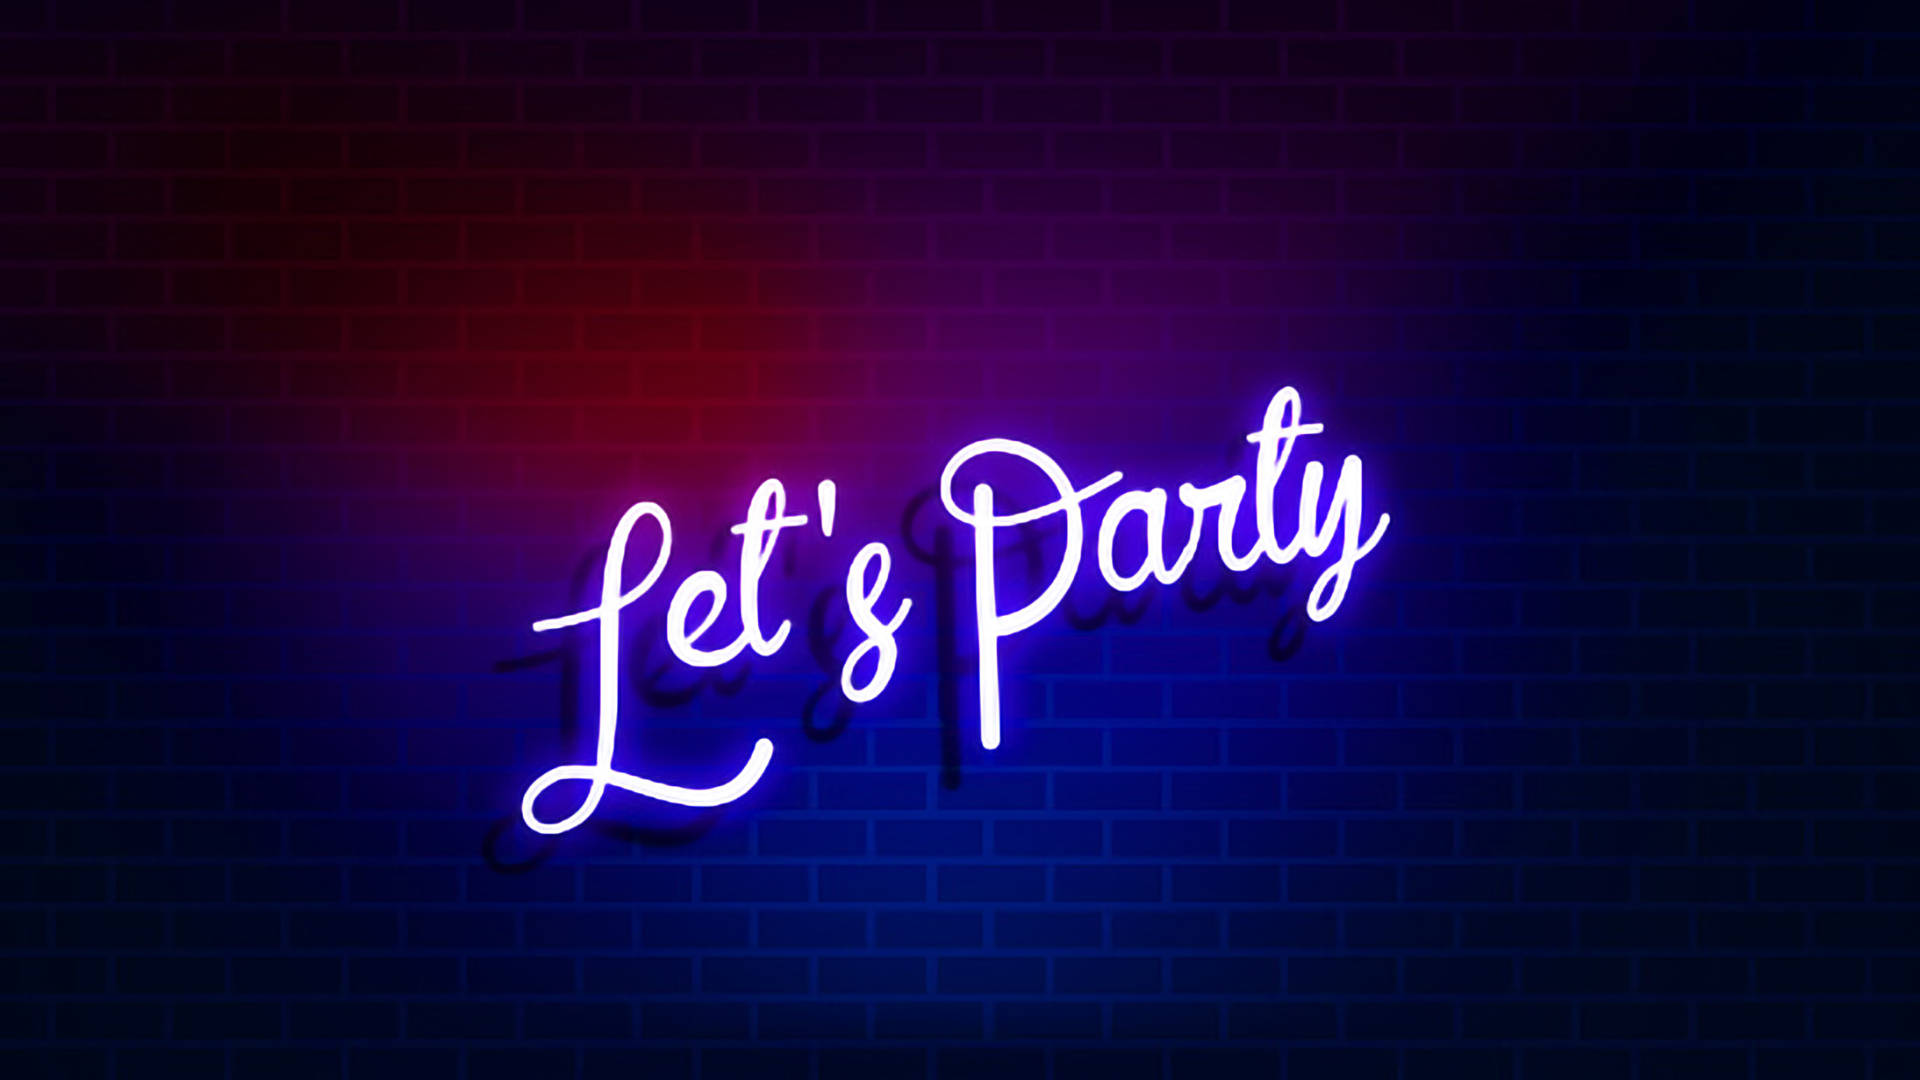 Let’s Party Neon Background